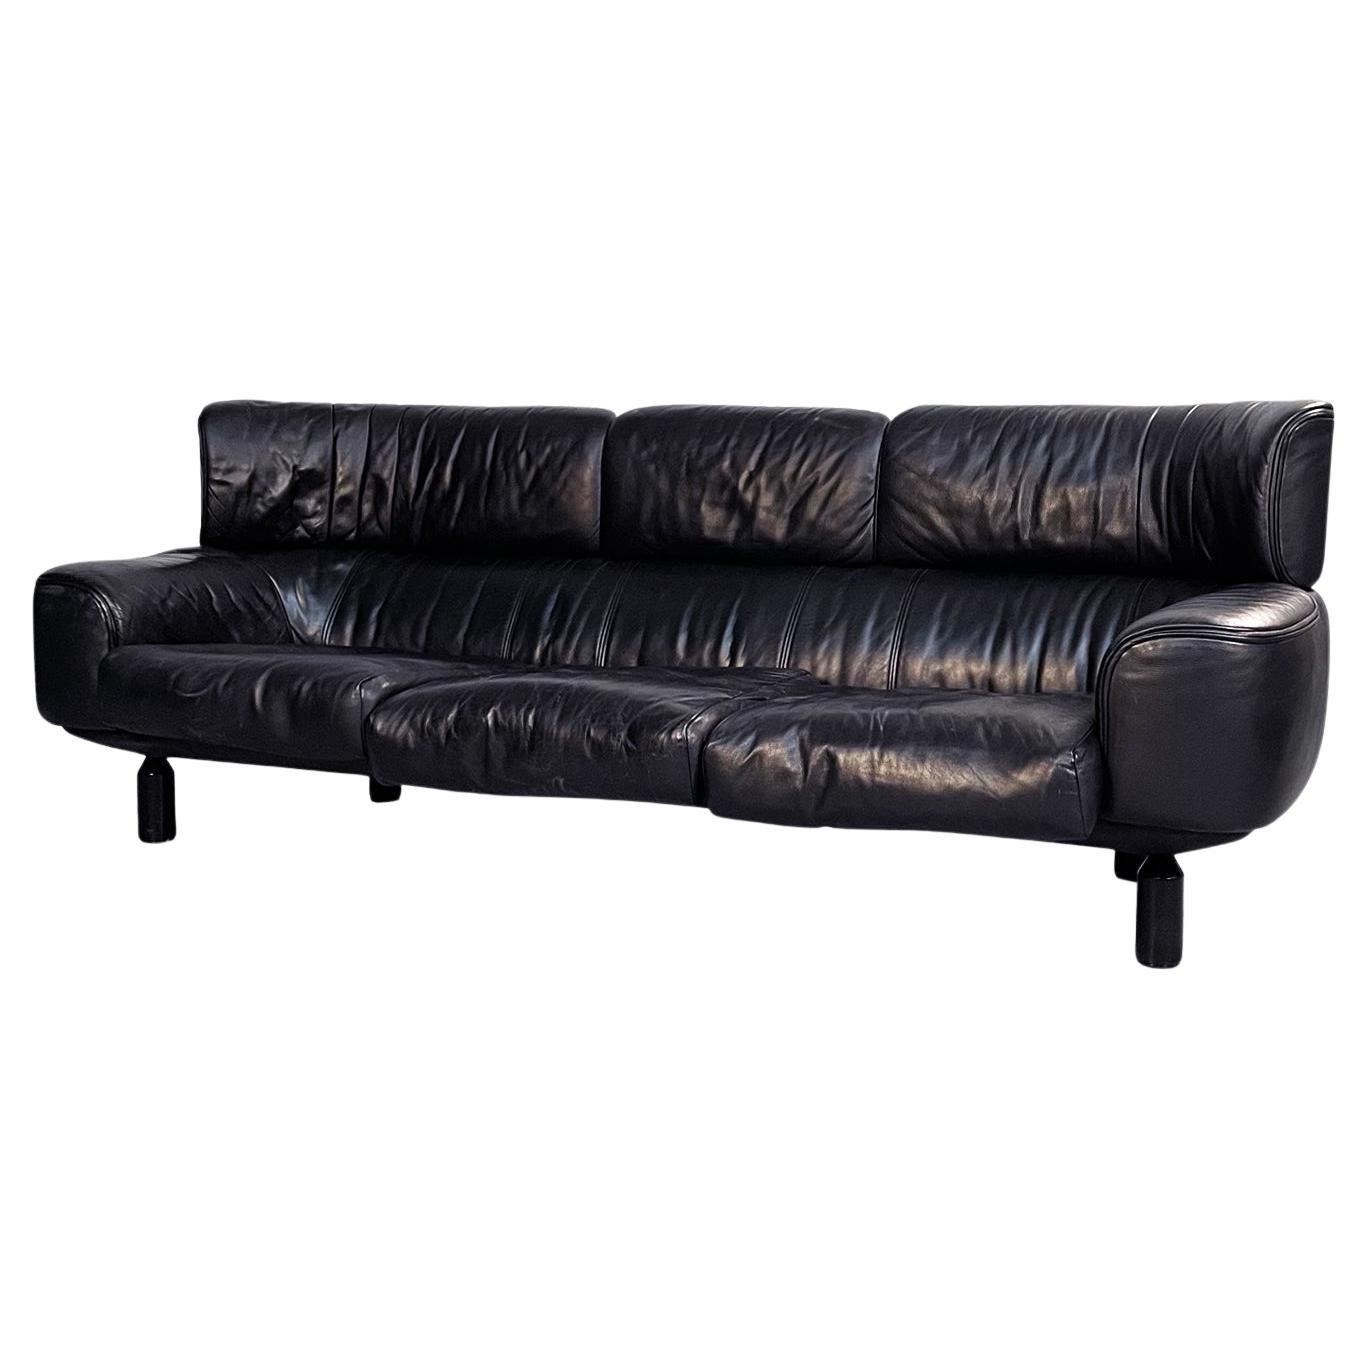 Italian Modern Black Leather Wood 3seat Sofa Bull by Frattini for Cassina, 1980s For Sale